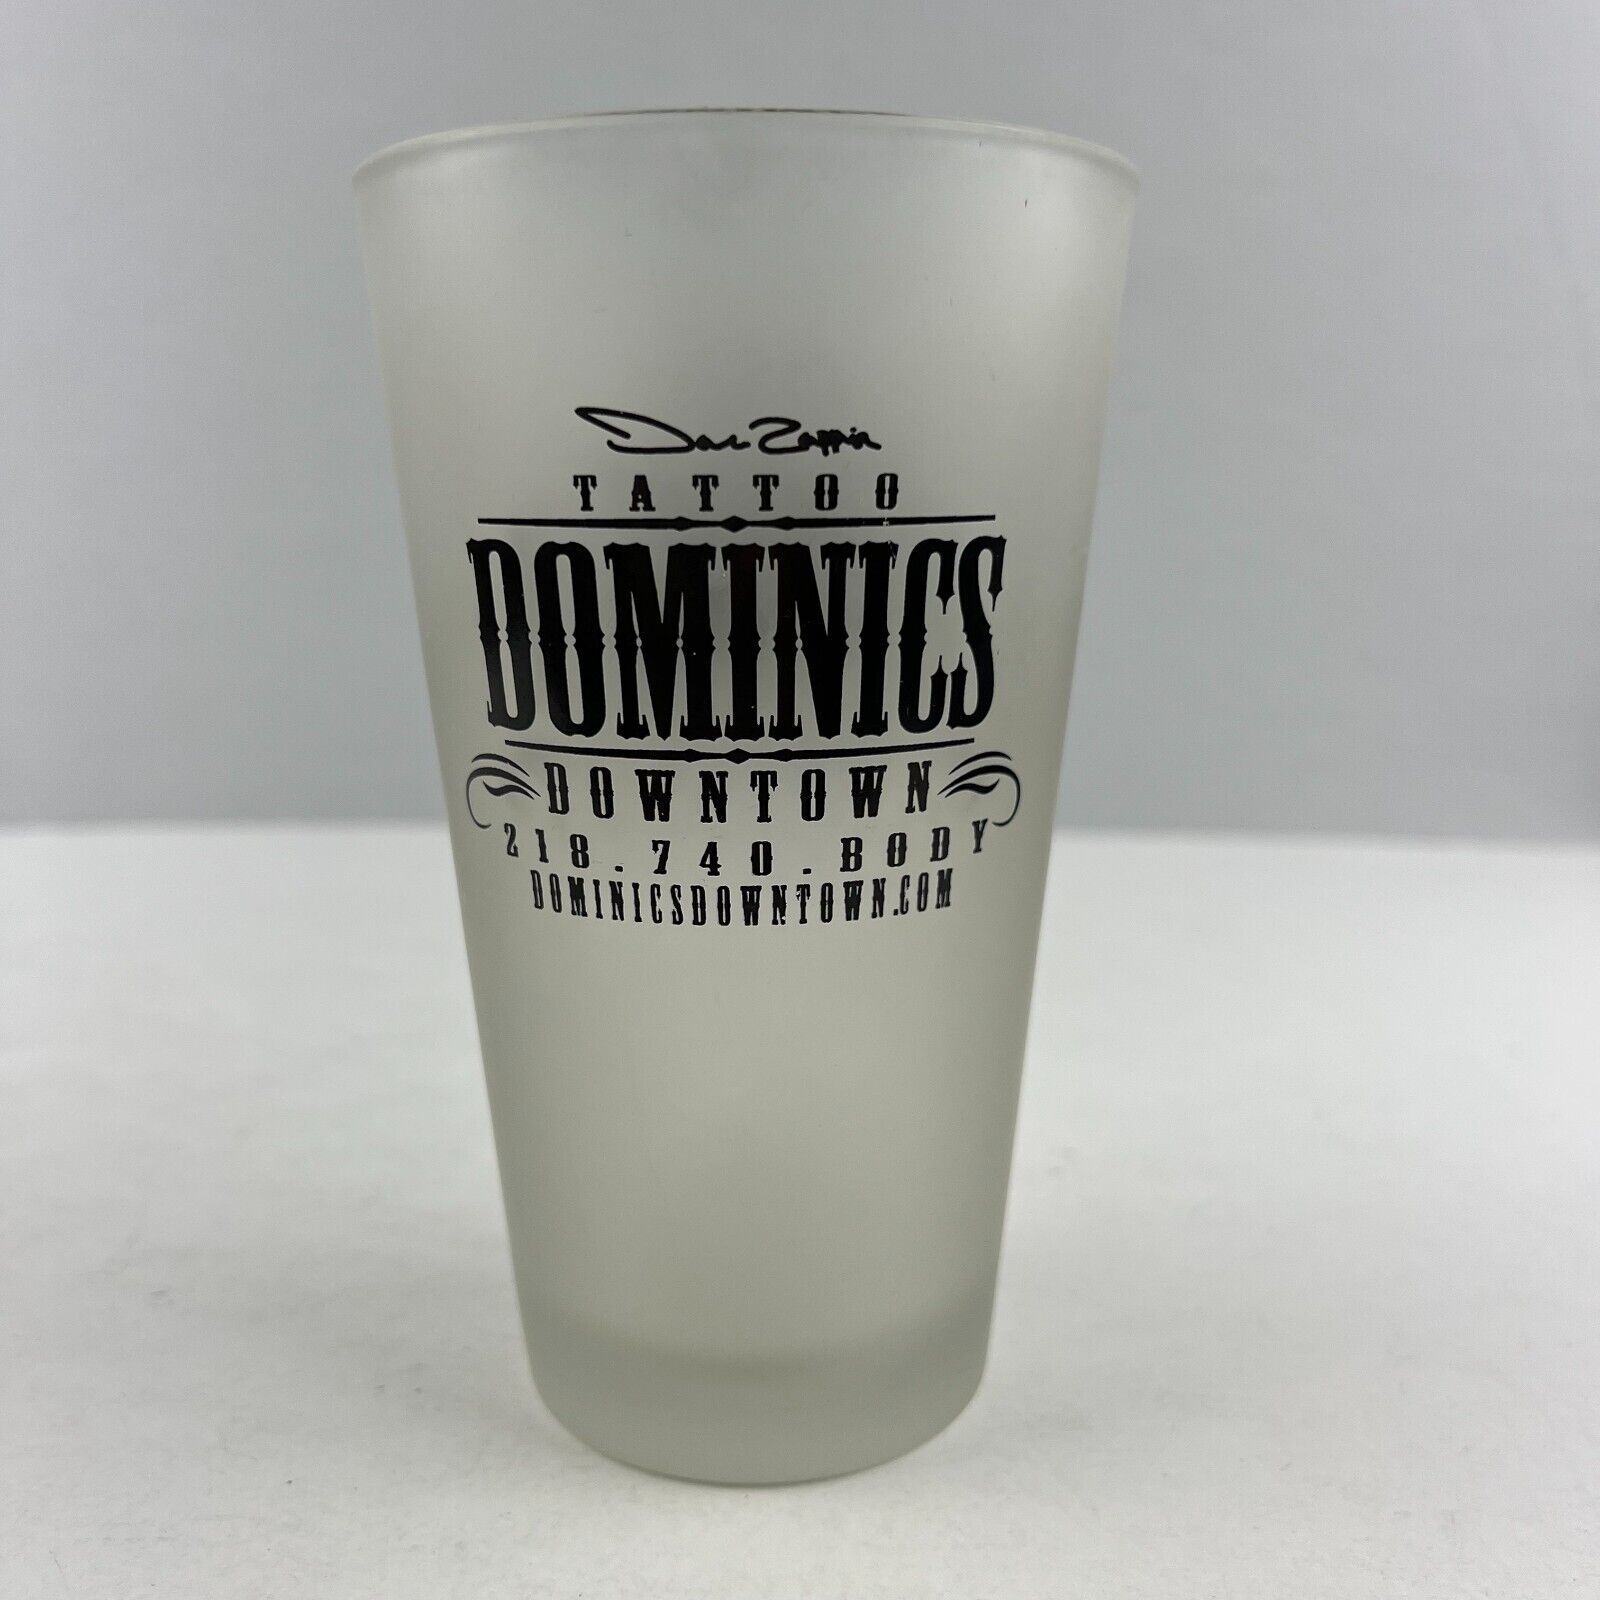 Primary image for Dominics Downtown & Dave Zappia Tattoo Pint Beer Glass